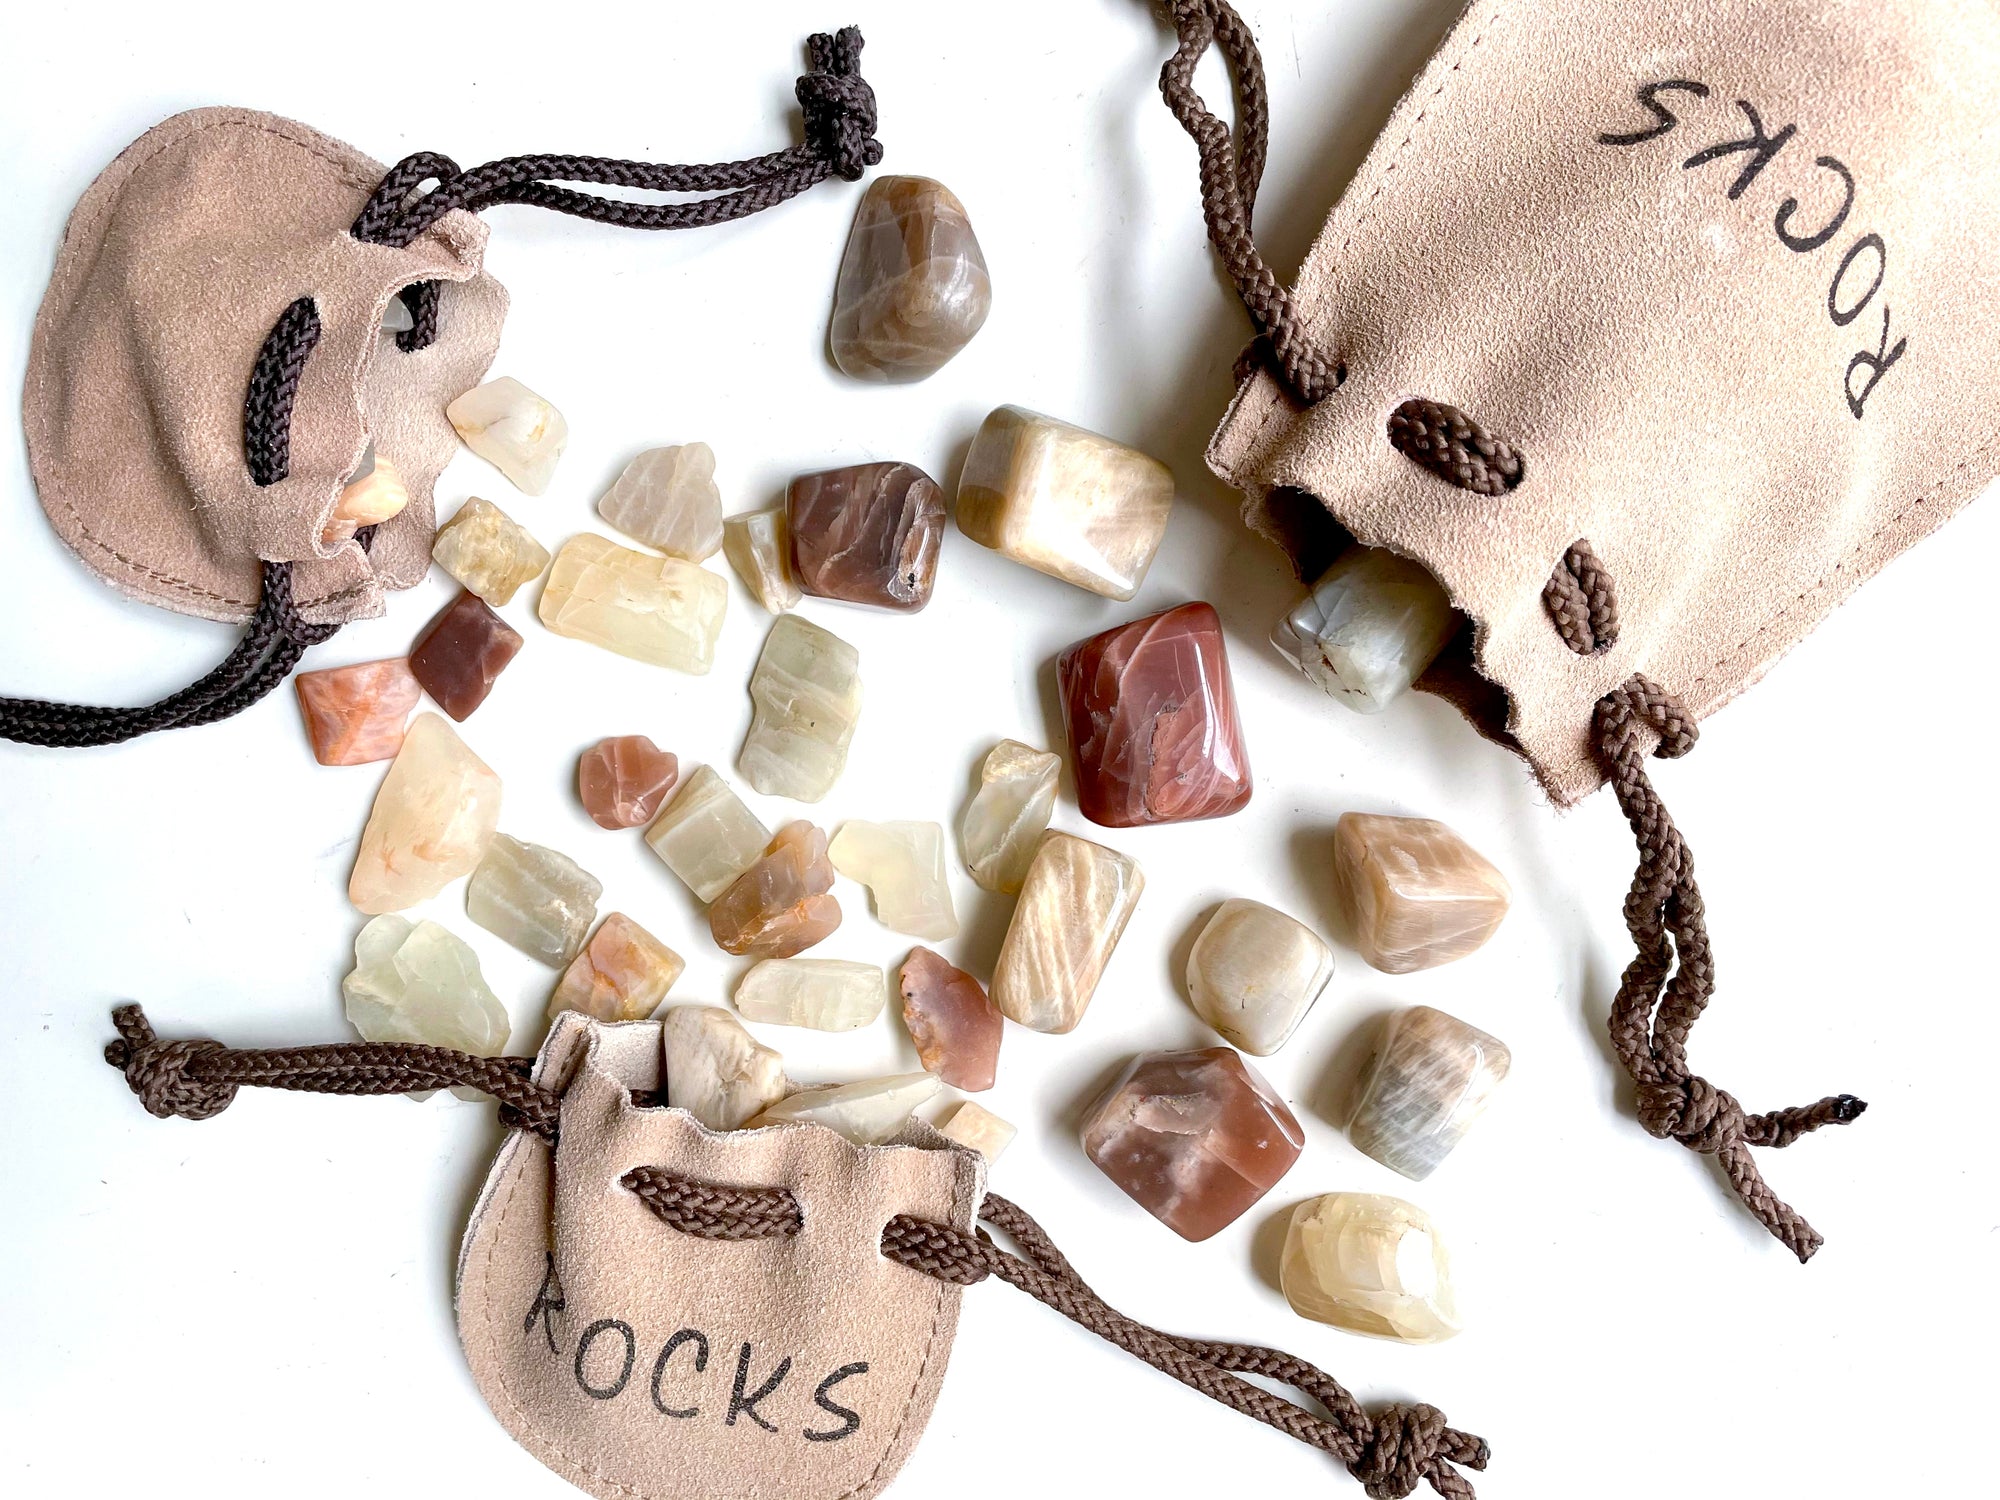 Leather "Rocks" Pouch